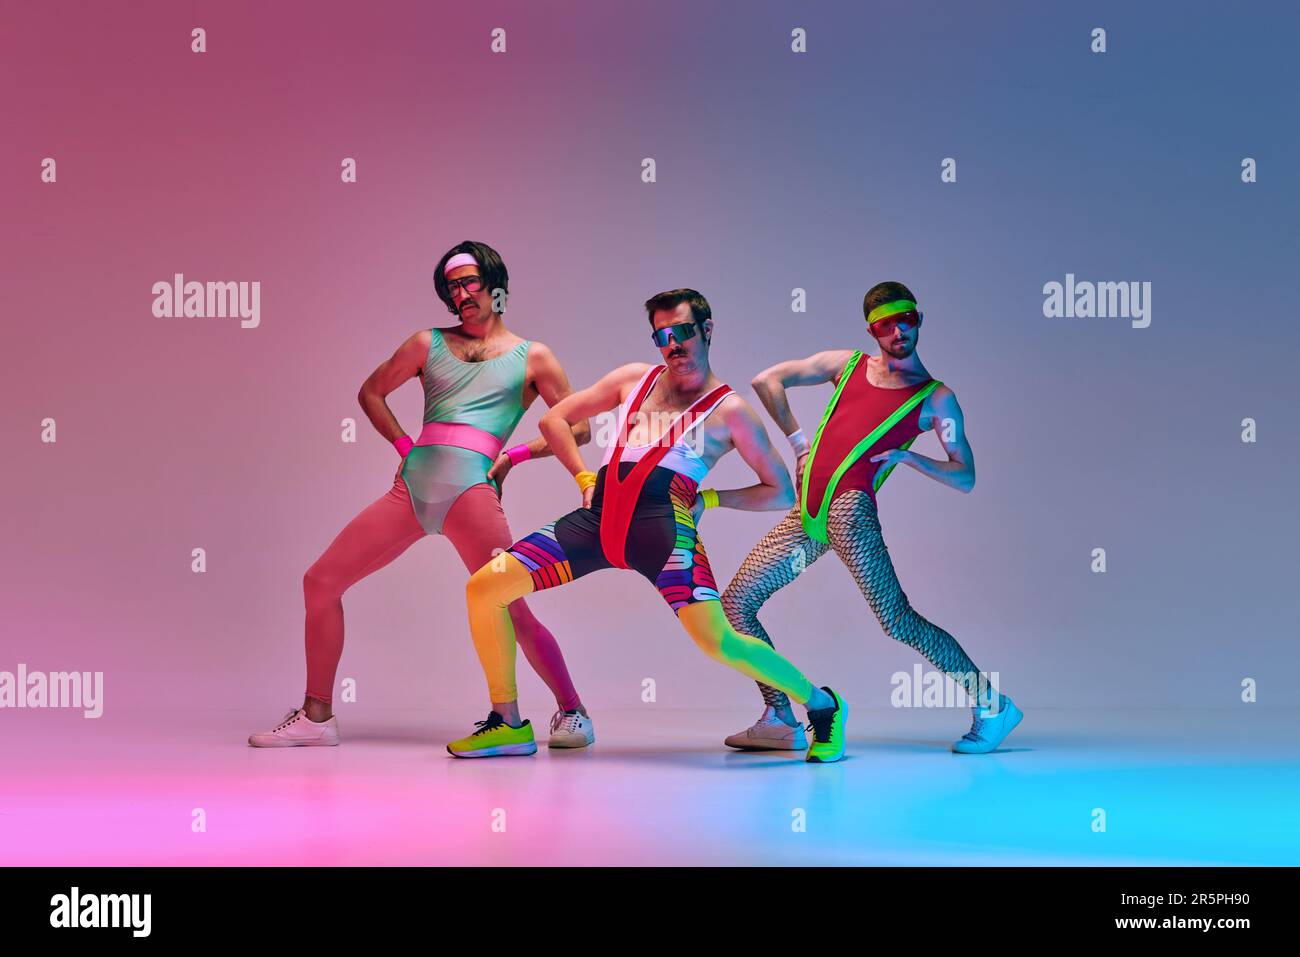 Funny men in vintage, colorful sportswear posing, doing aerobics exercises  against gradient blue pink studio background in neon light Stock Photo -  Alamy